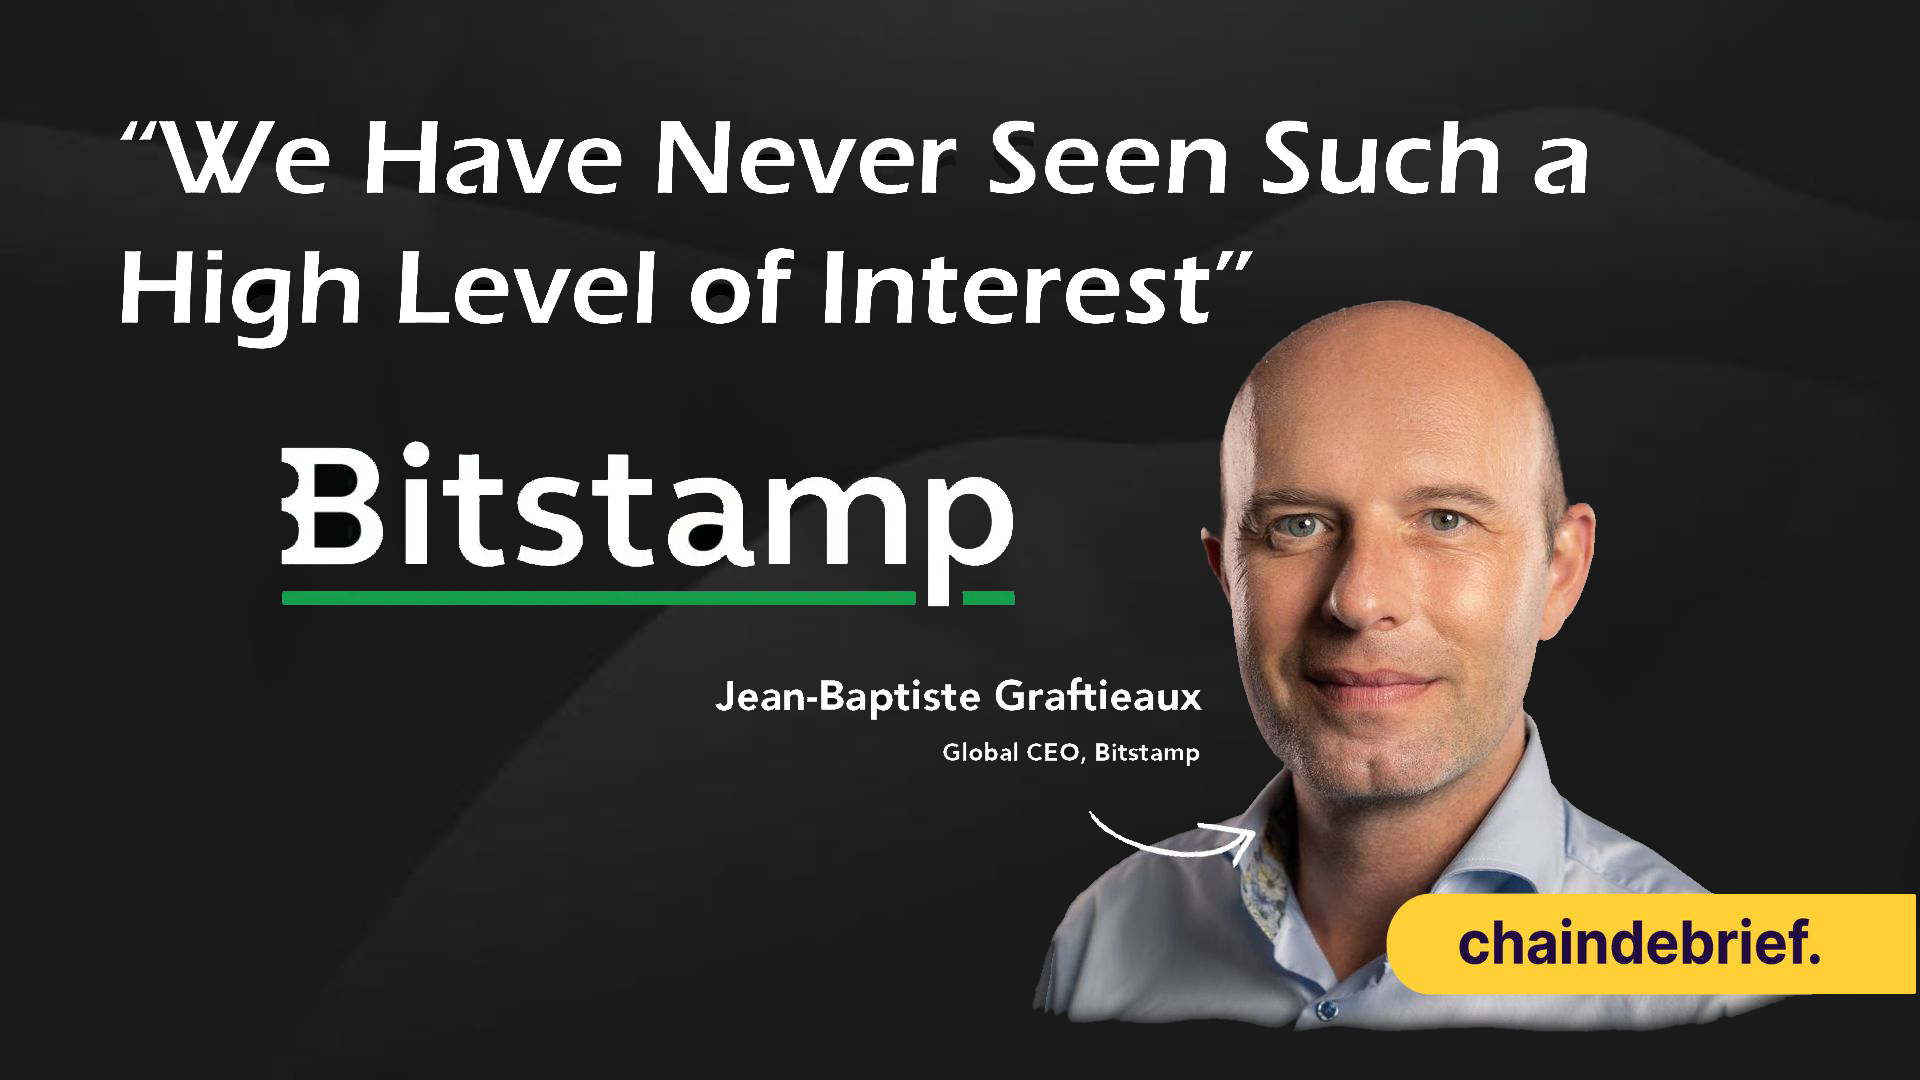 Bitstamp’s CEO on Regulation, Bear Market Building & Seeing Bitcoin at $200 featured image